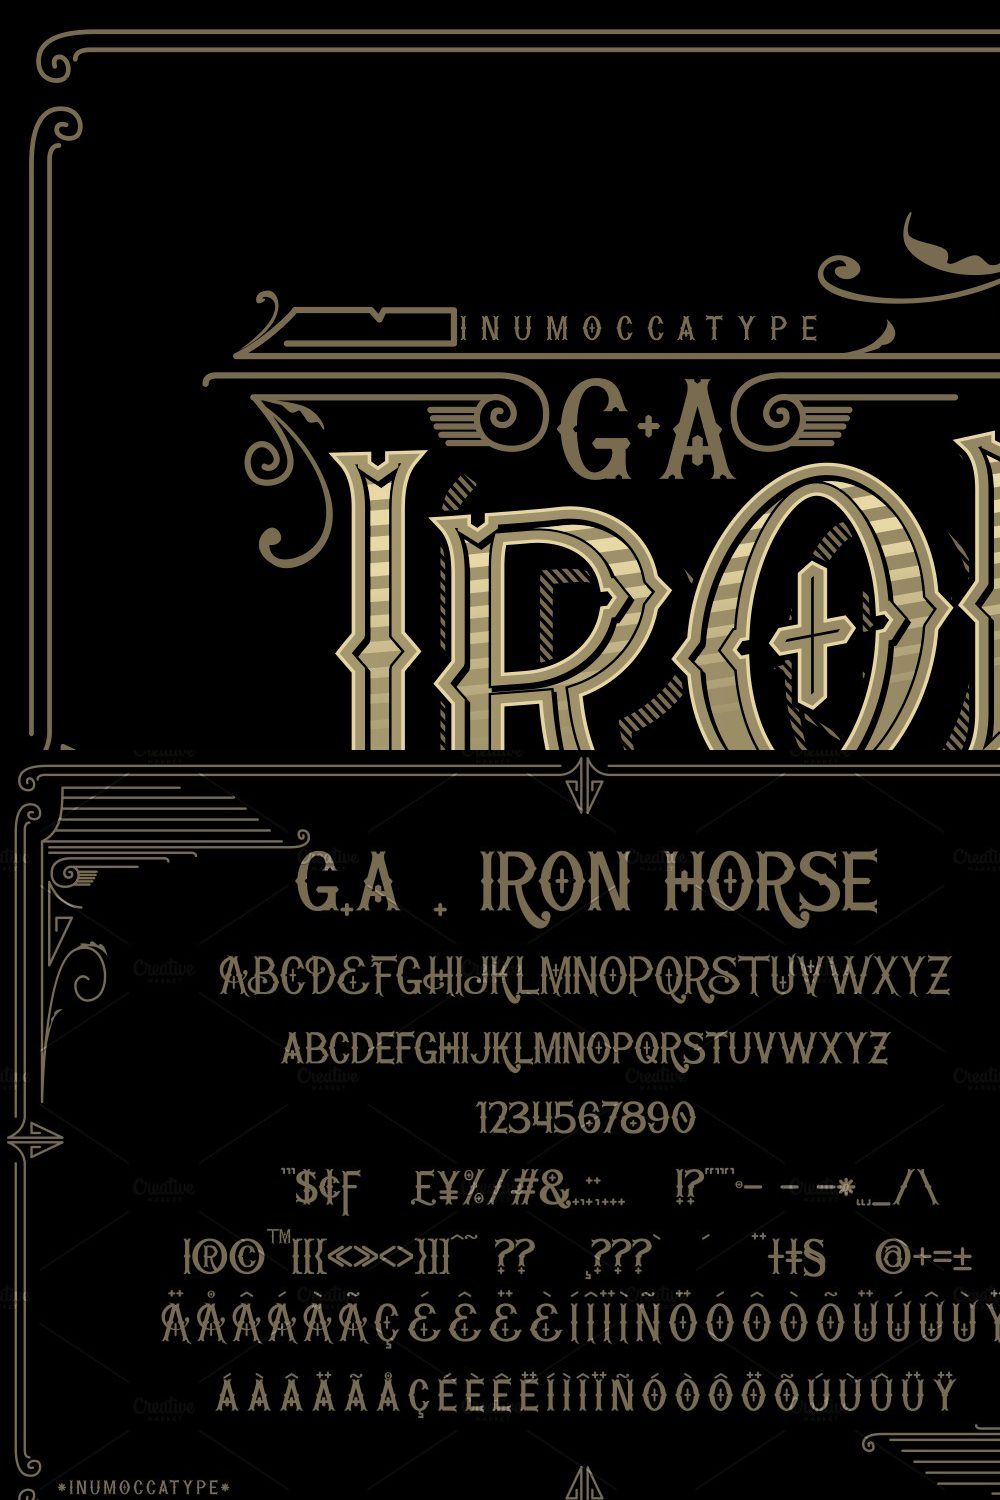 G.A Iron Horse pinterest preview image.